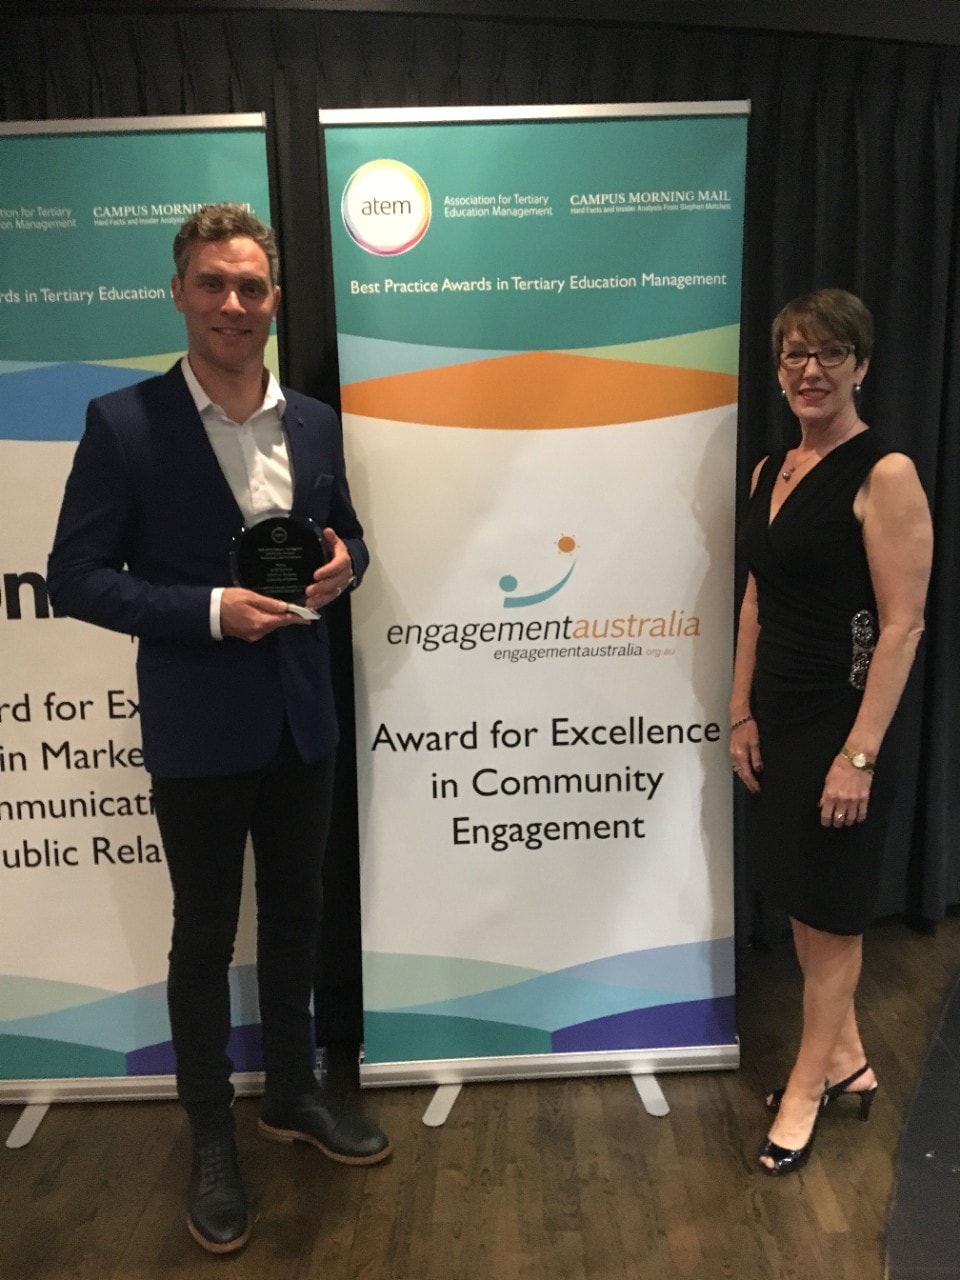 Jared Harrison and Fiona Sullivan from the Business School with the Engagement Australia Excellence in Community Engagement Award received at the 2018 Association for Tertiary Education Management best practice awards.